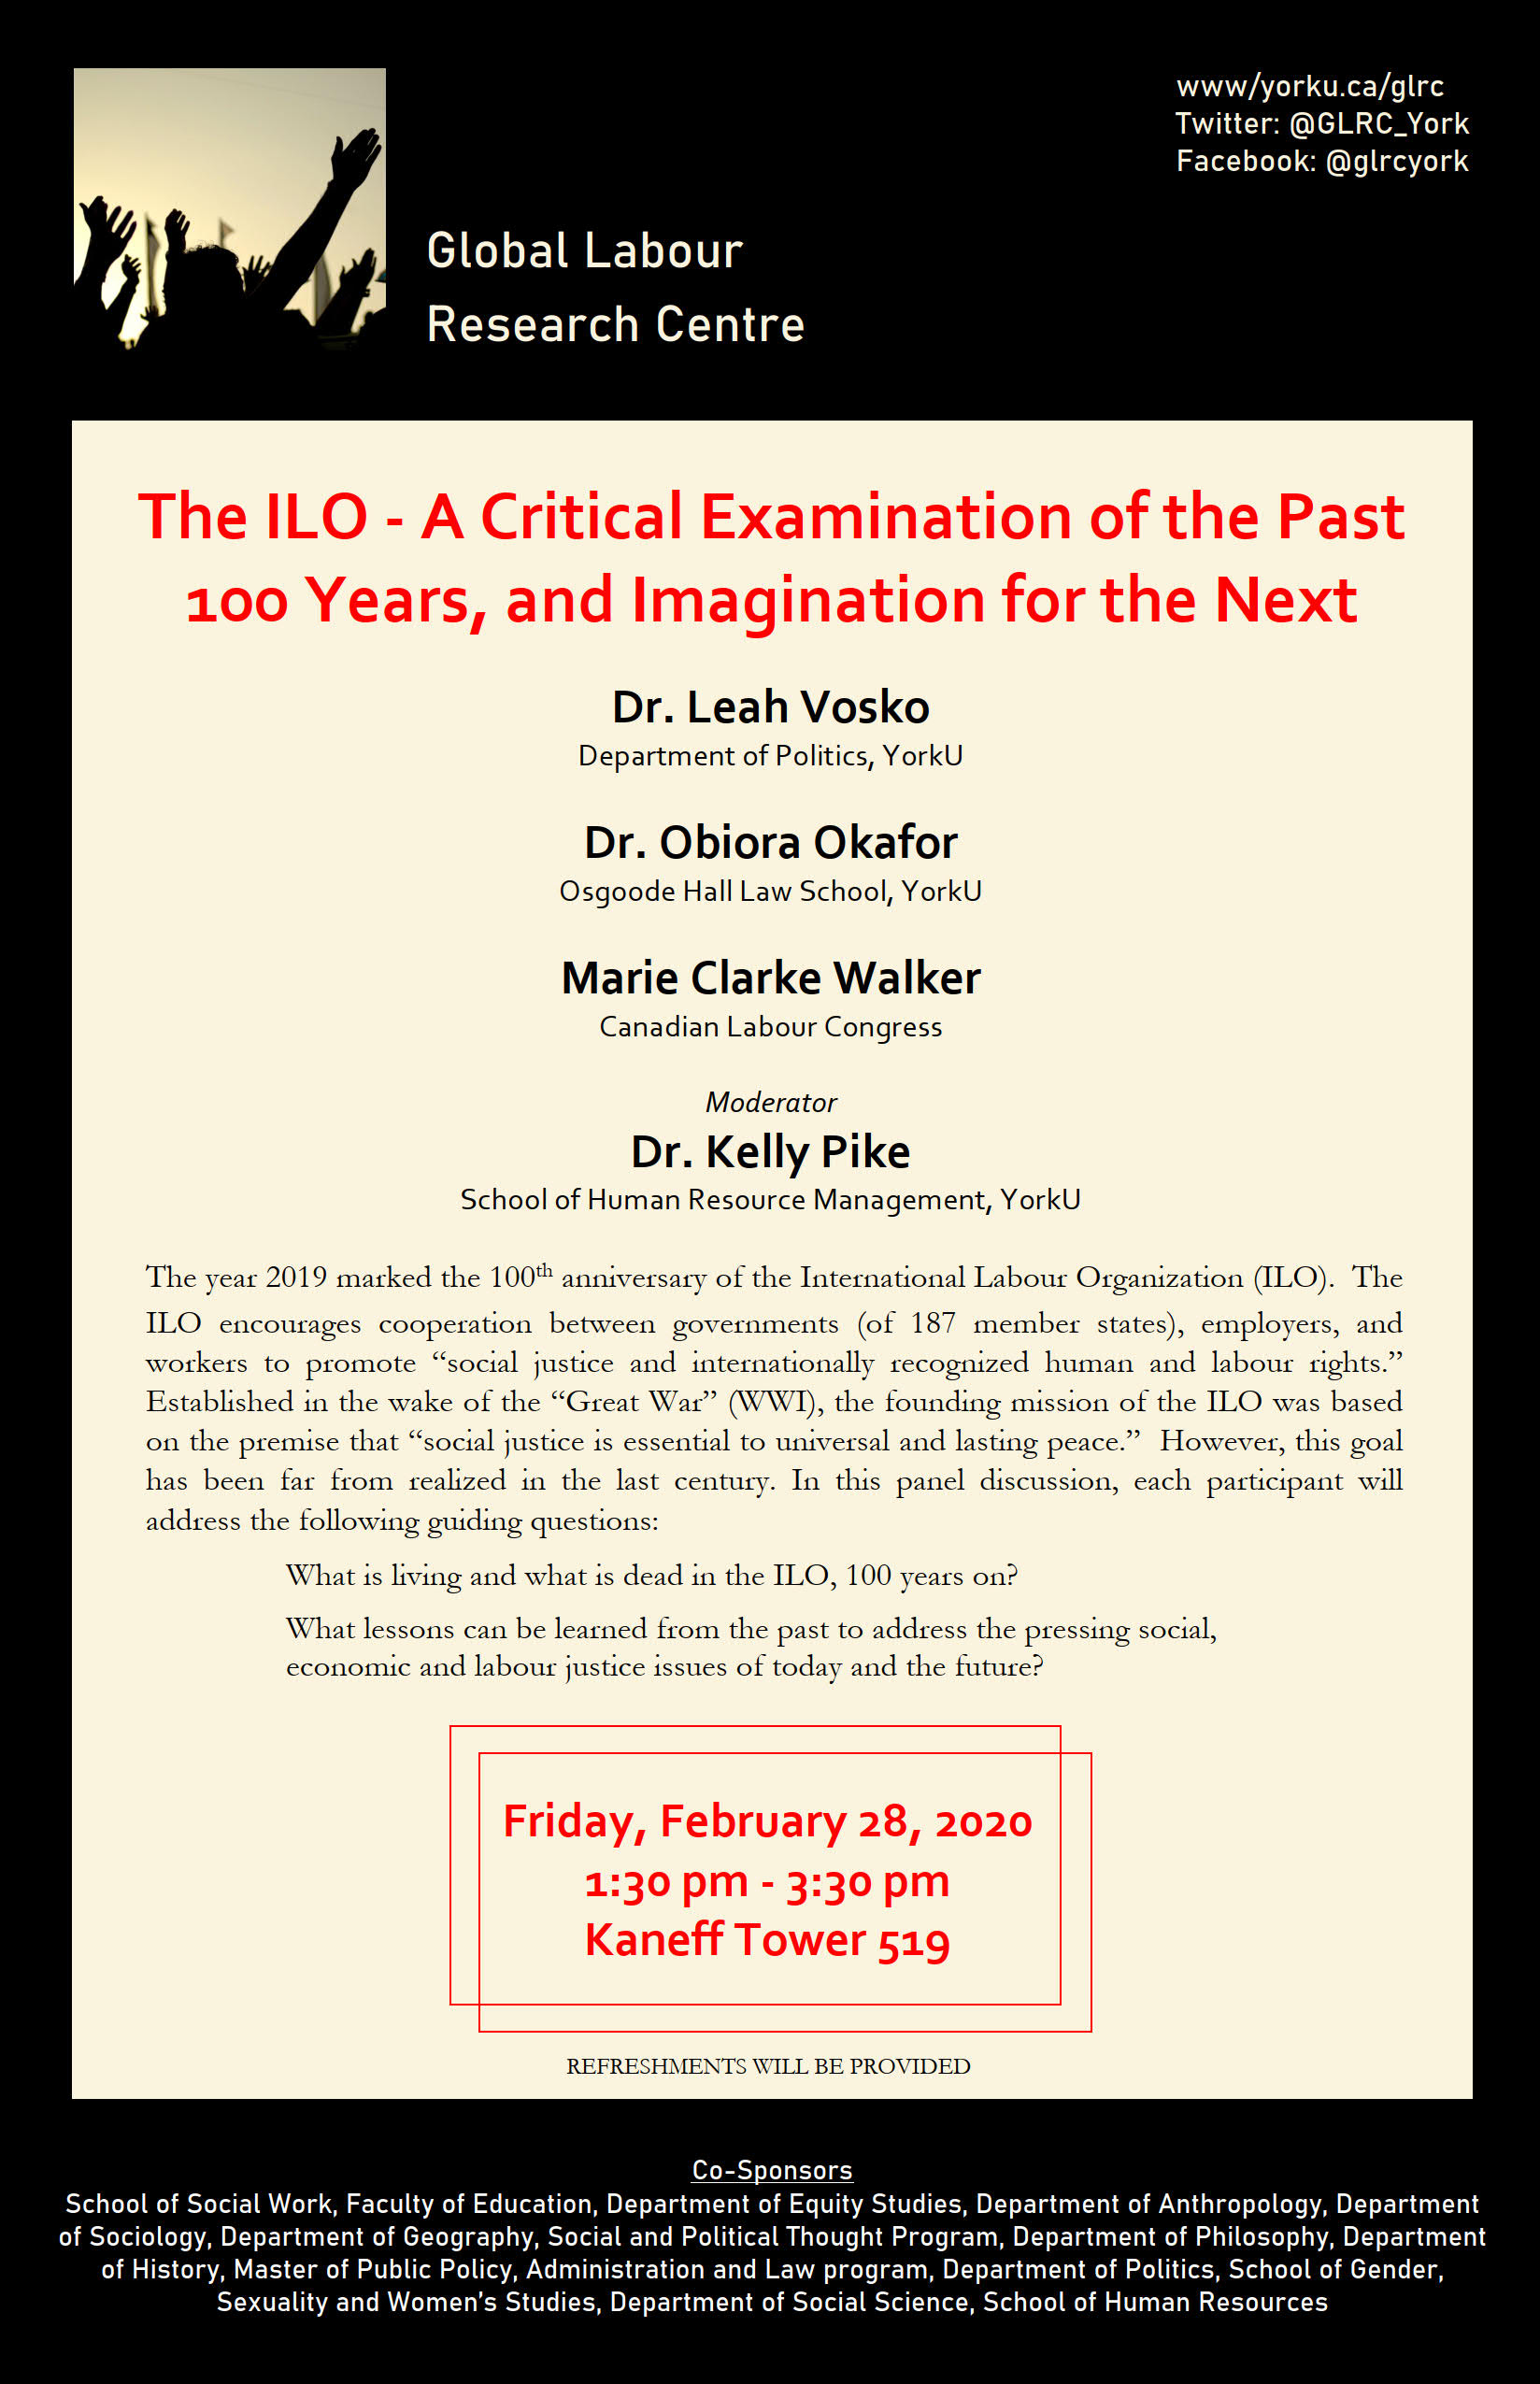 Poster for The ILO A Critical Examination of the Past 100 years, an imagination for the next